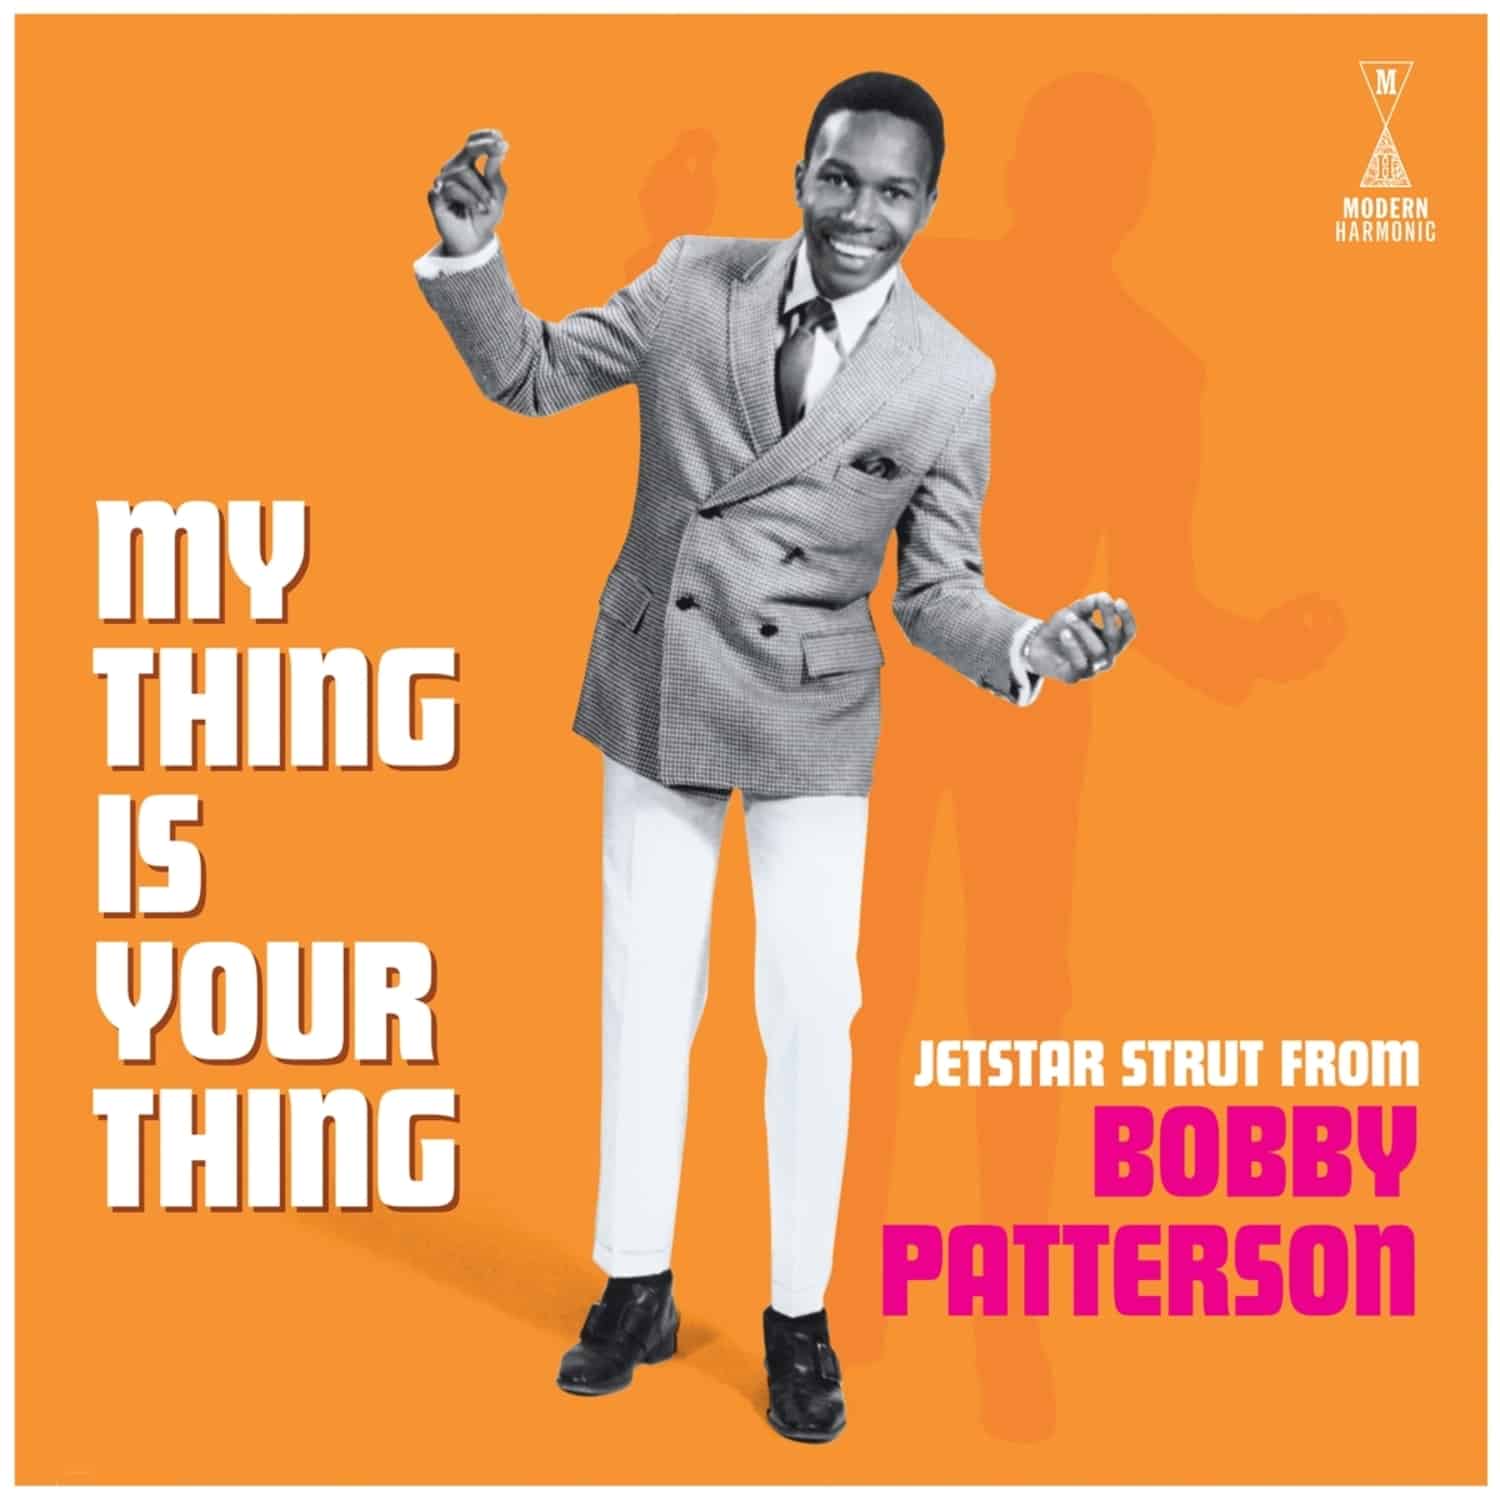 Bobby Patterson - MY THING IS YOUR THING - JETSTAR STRUT FROM BOBBY 